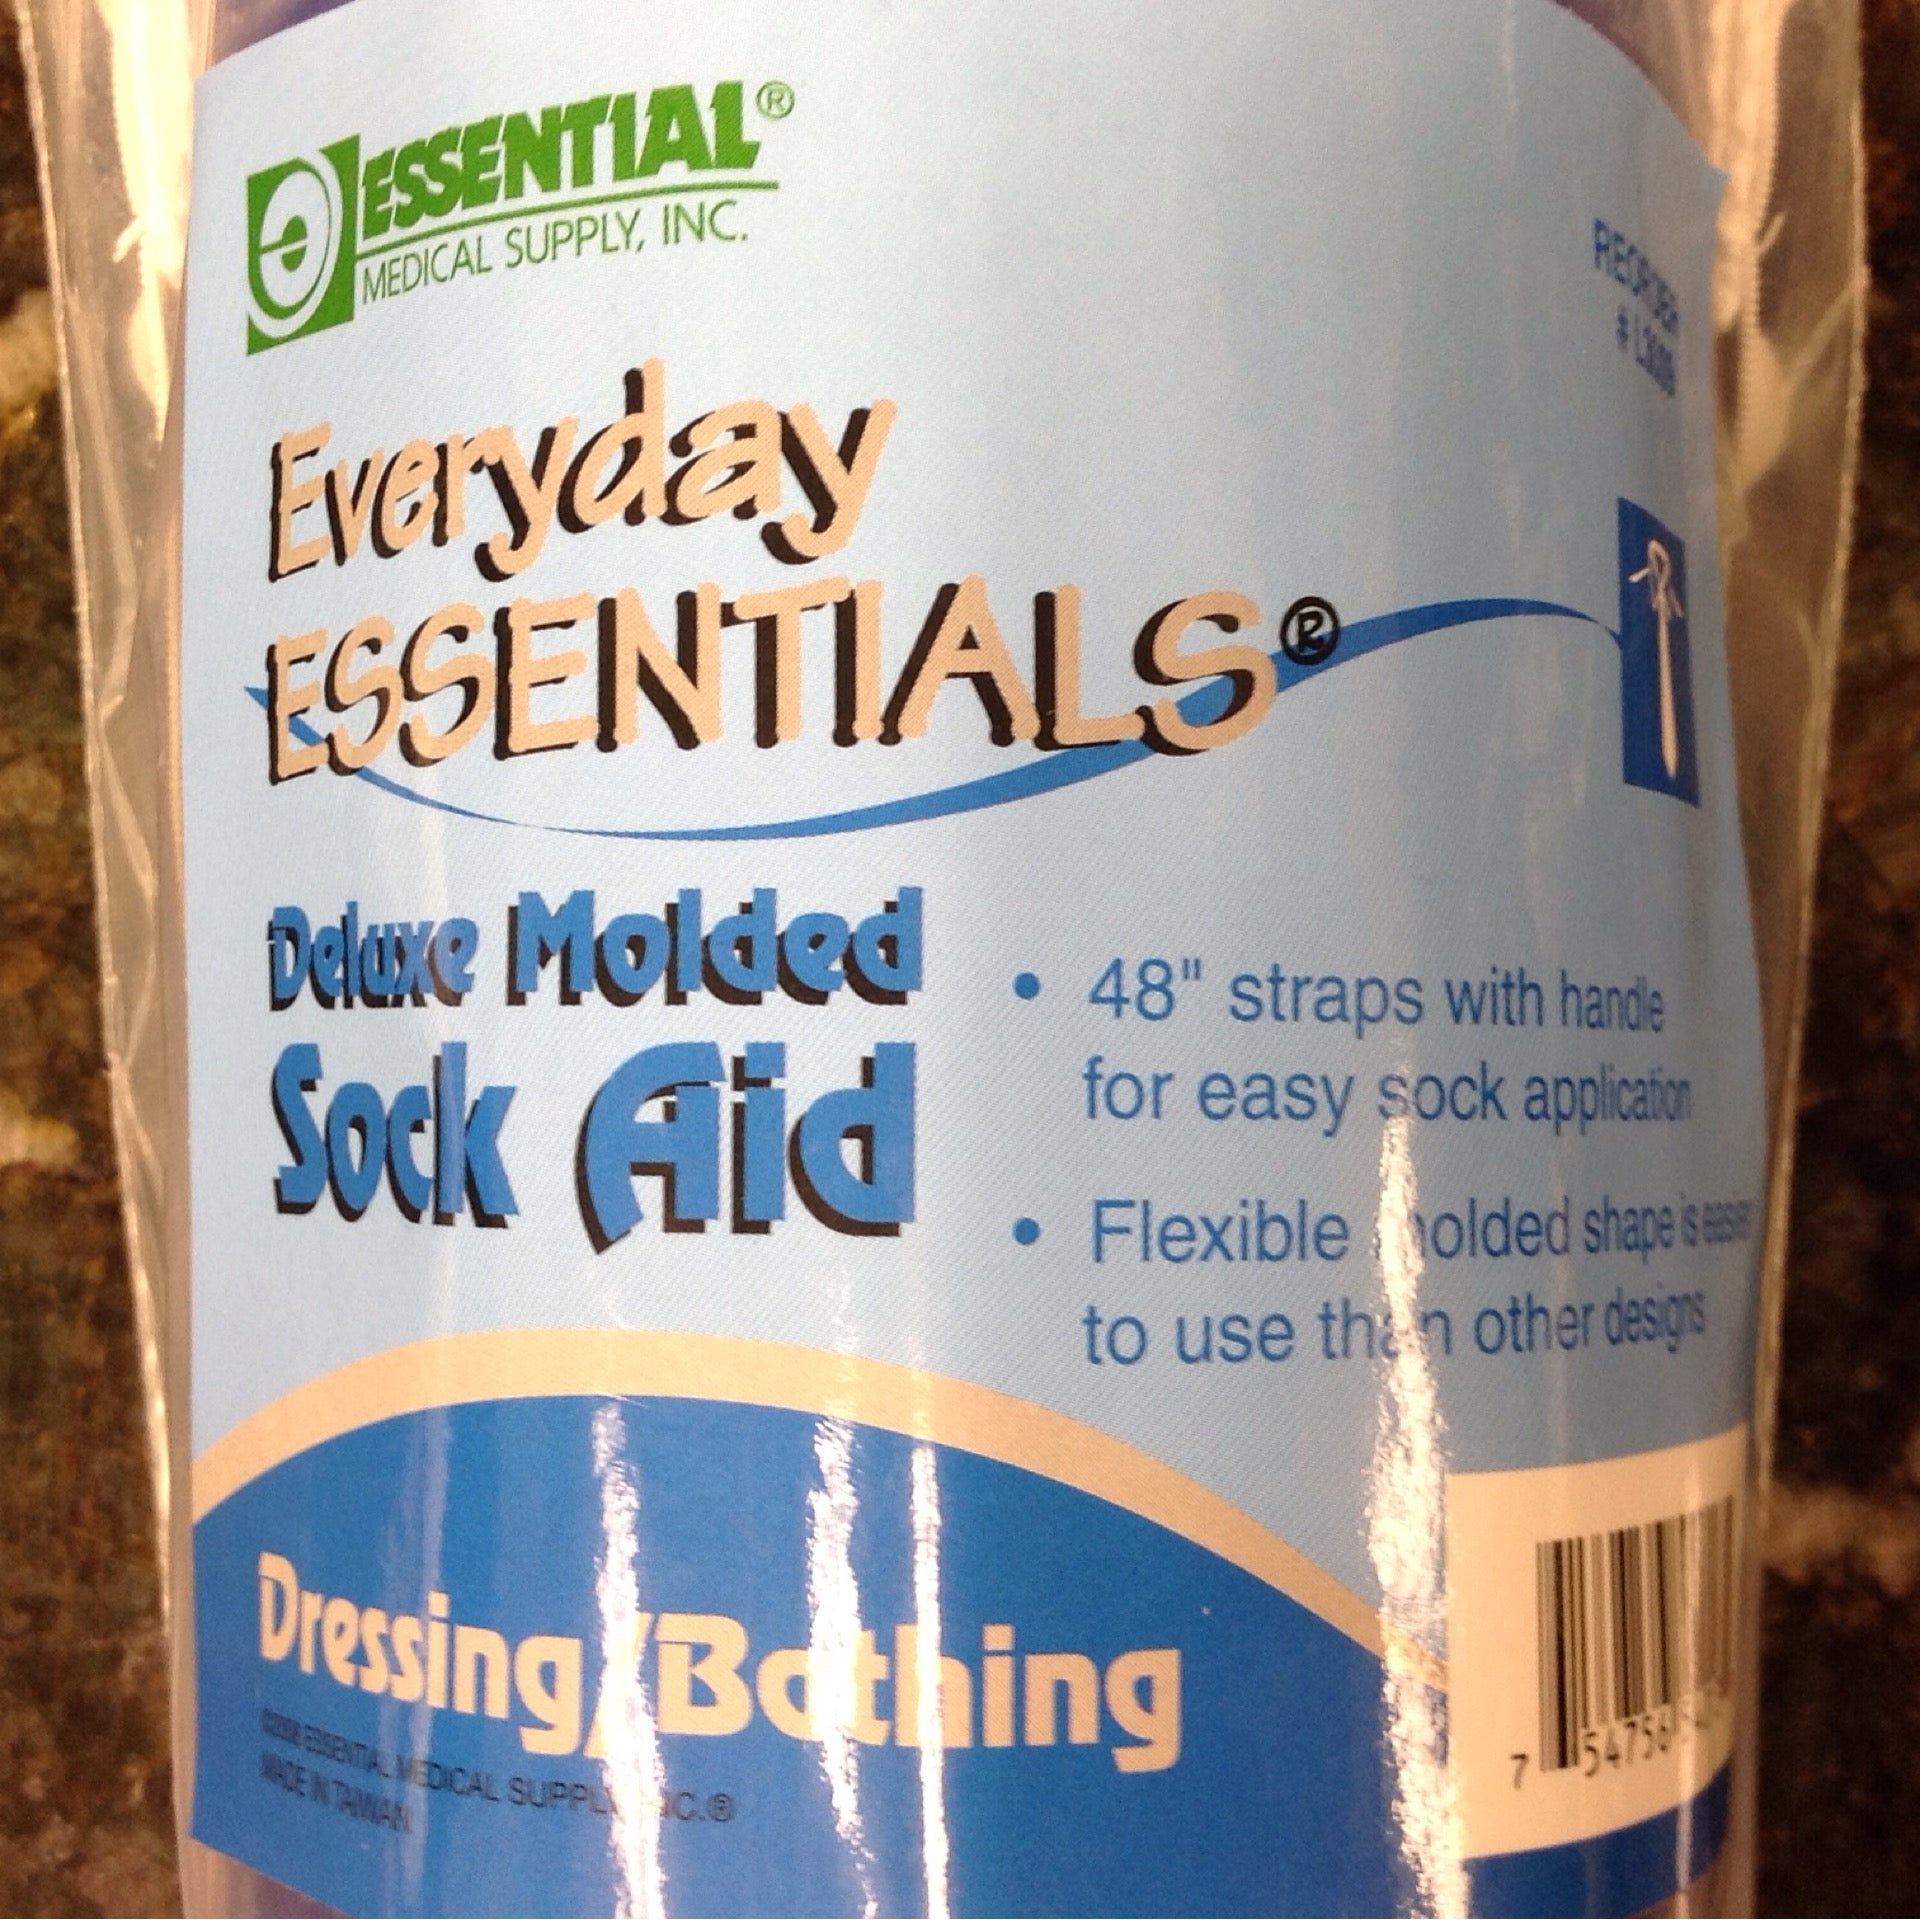 Essential Everyday Essentials Sock Aid, Deluxe Molded